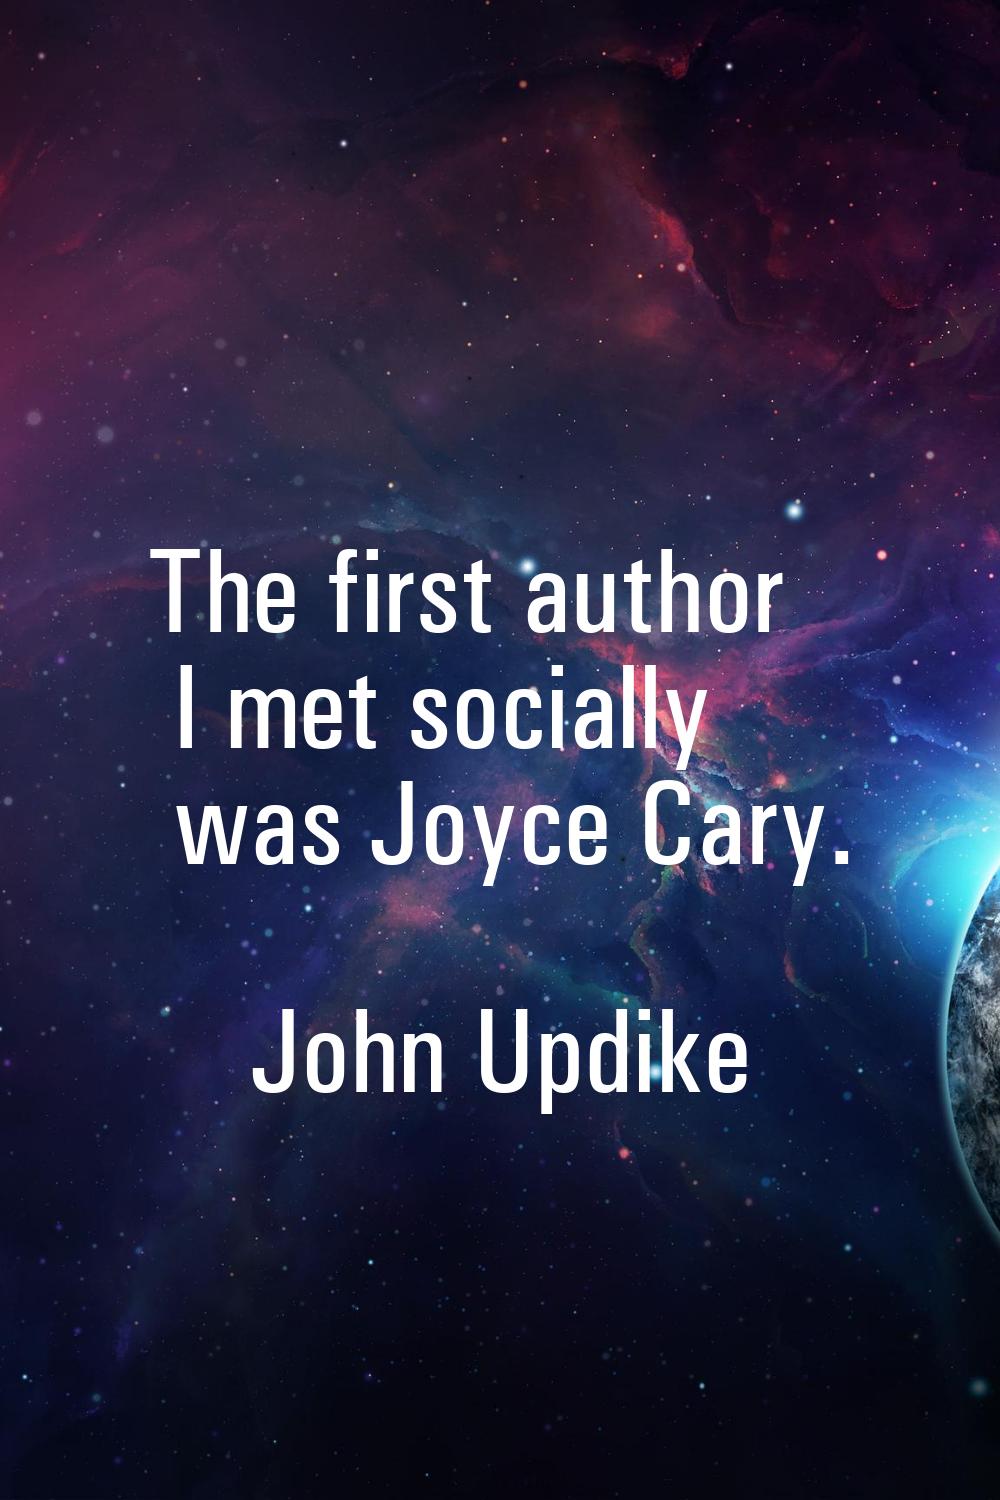 The first author I met socially was Joyce Cary.